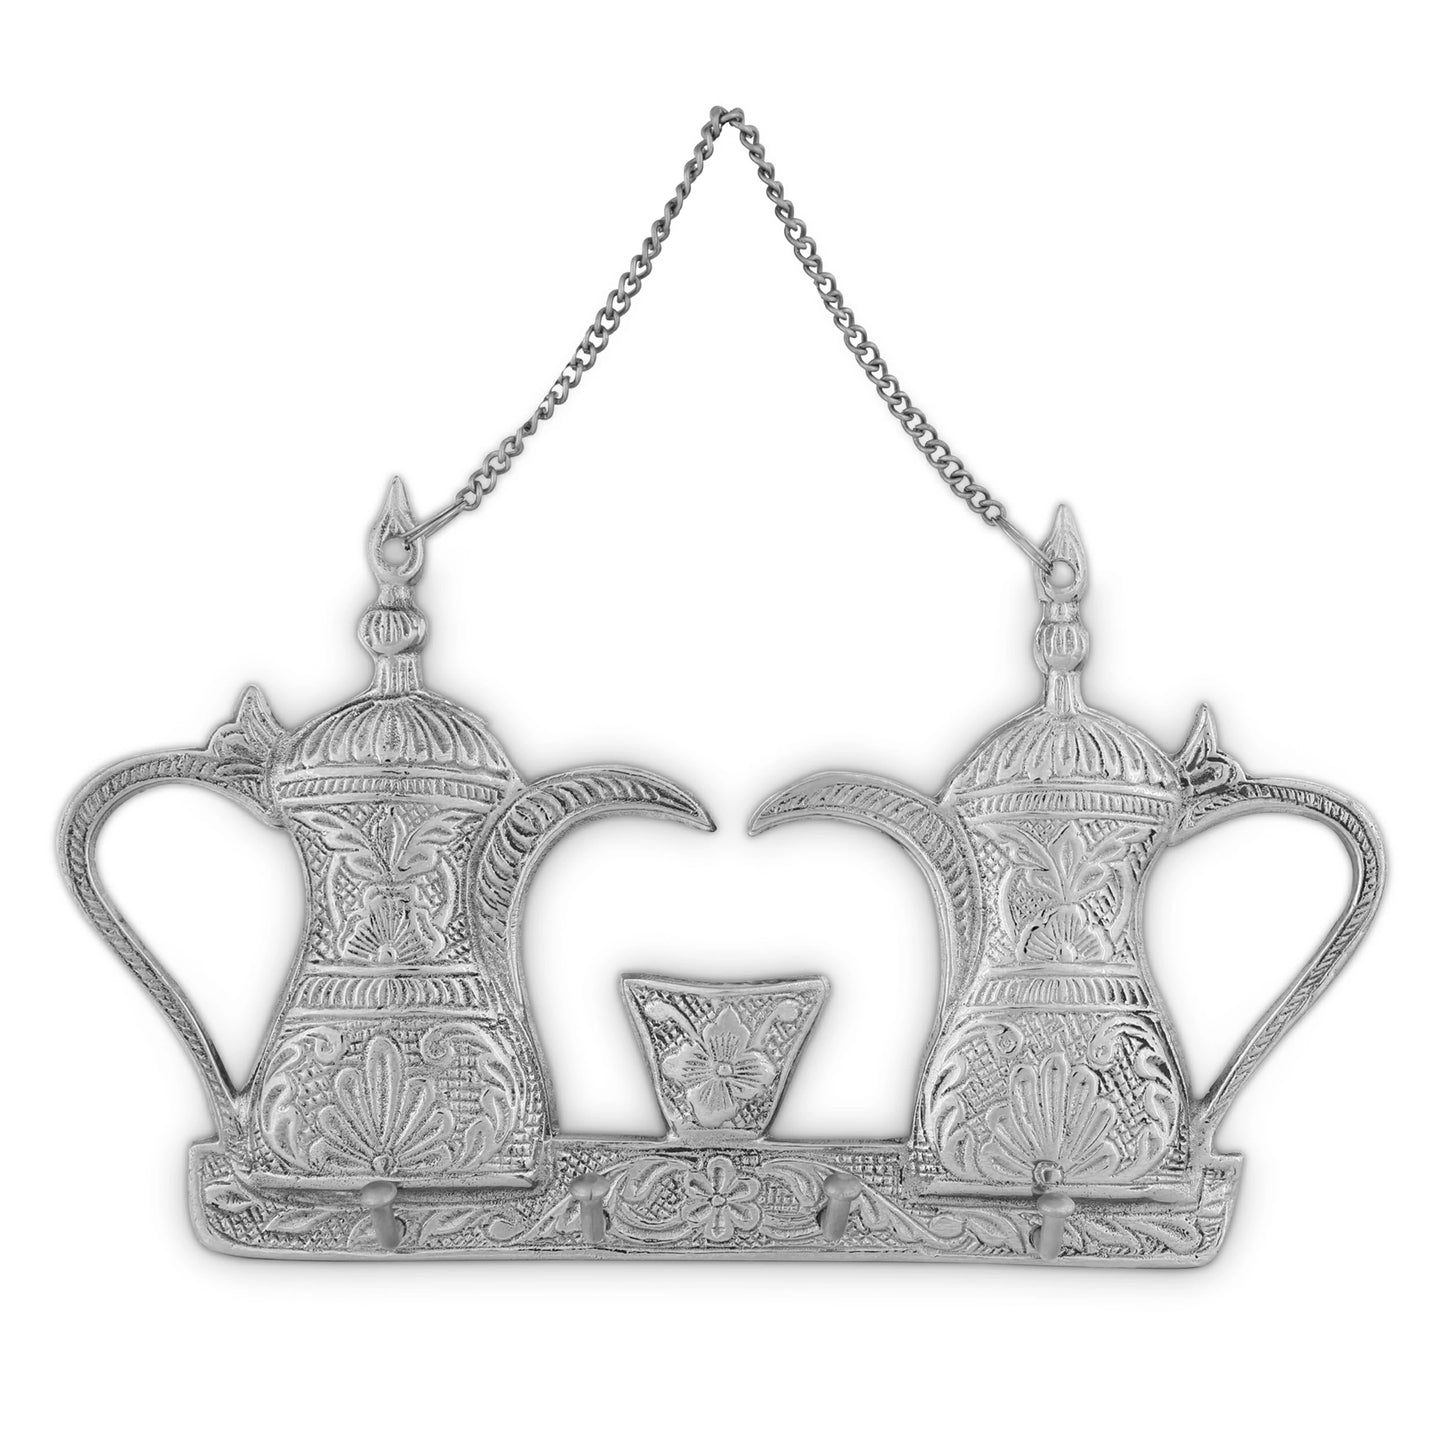 Traditional Emirati Dallah Shaped Key Hanger Made from Nickel With Gloassy Silver Finish